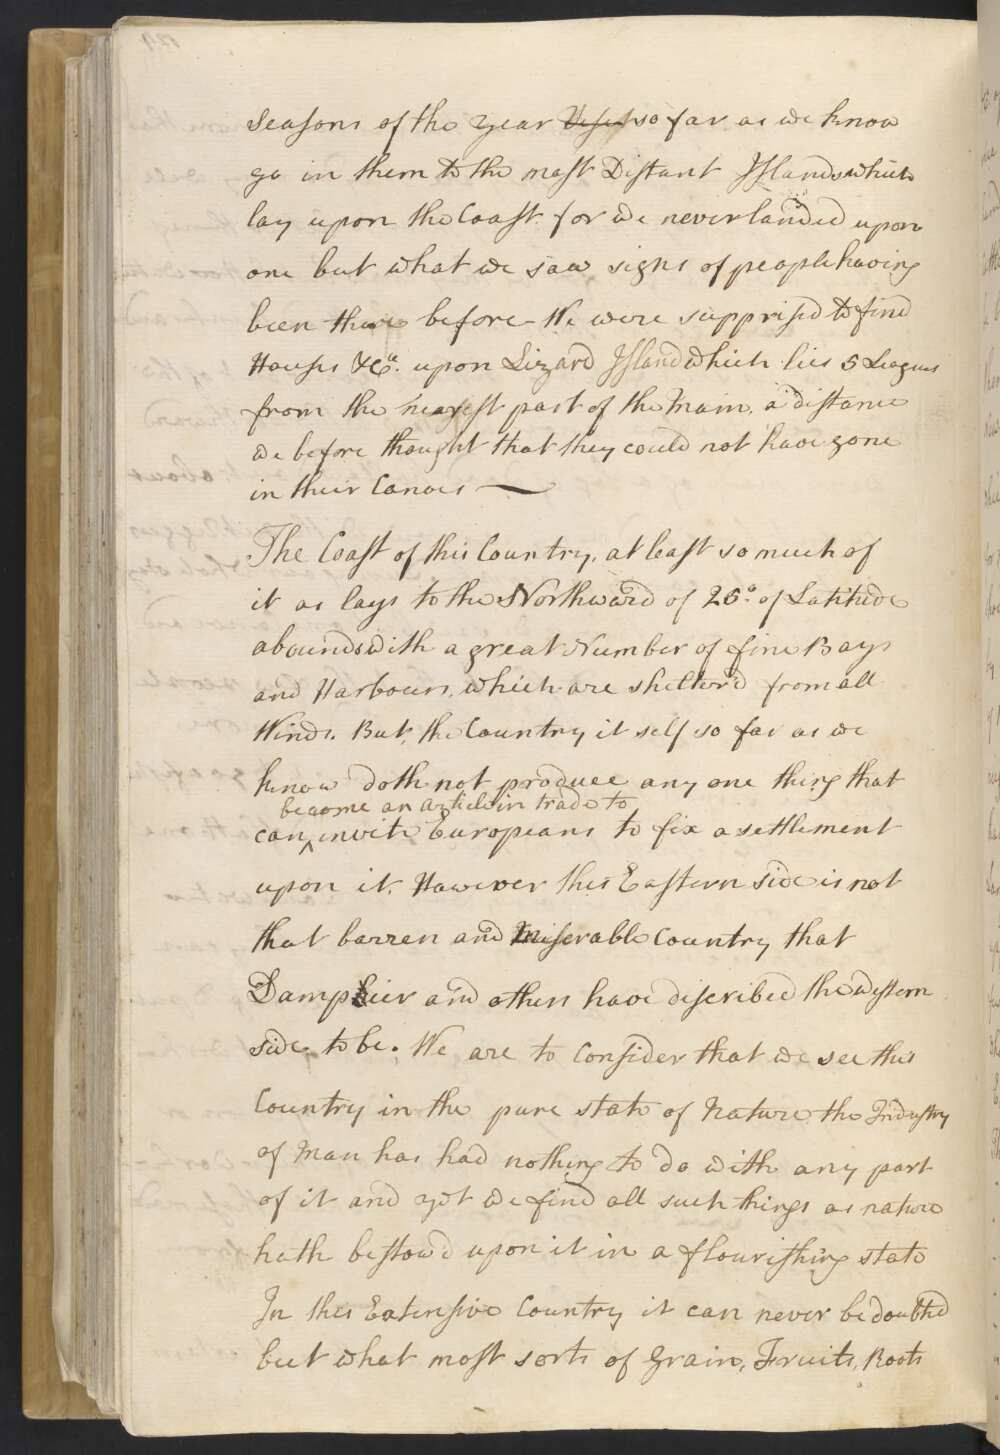 Handwritten journal entry by James Cook - click to view larger image